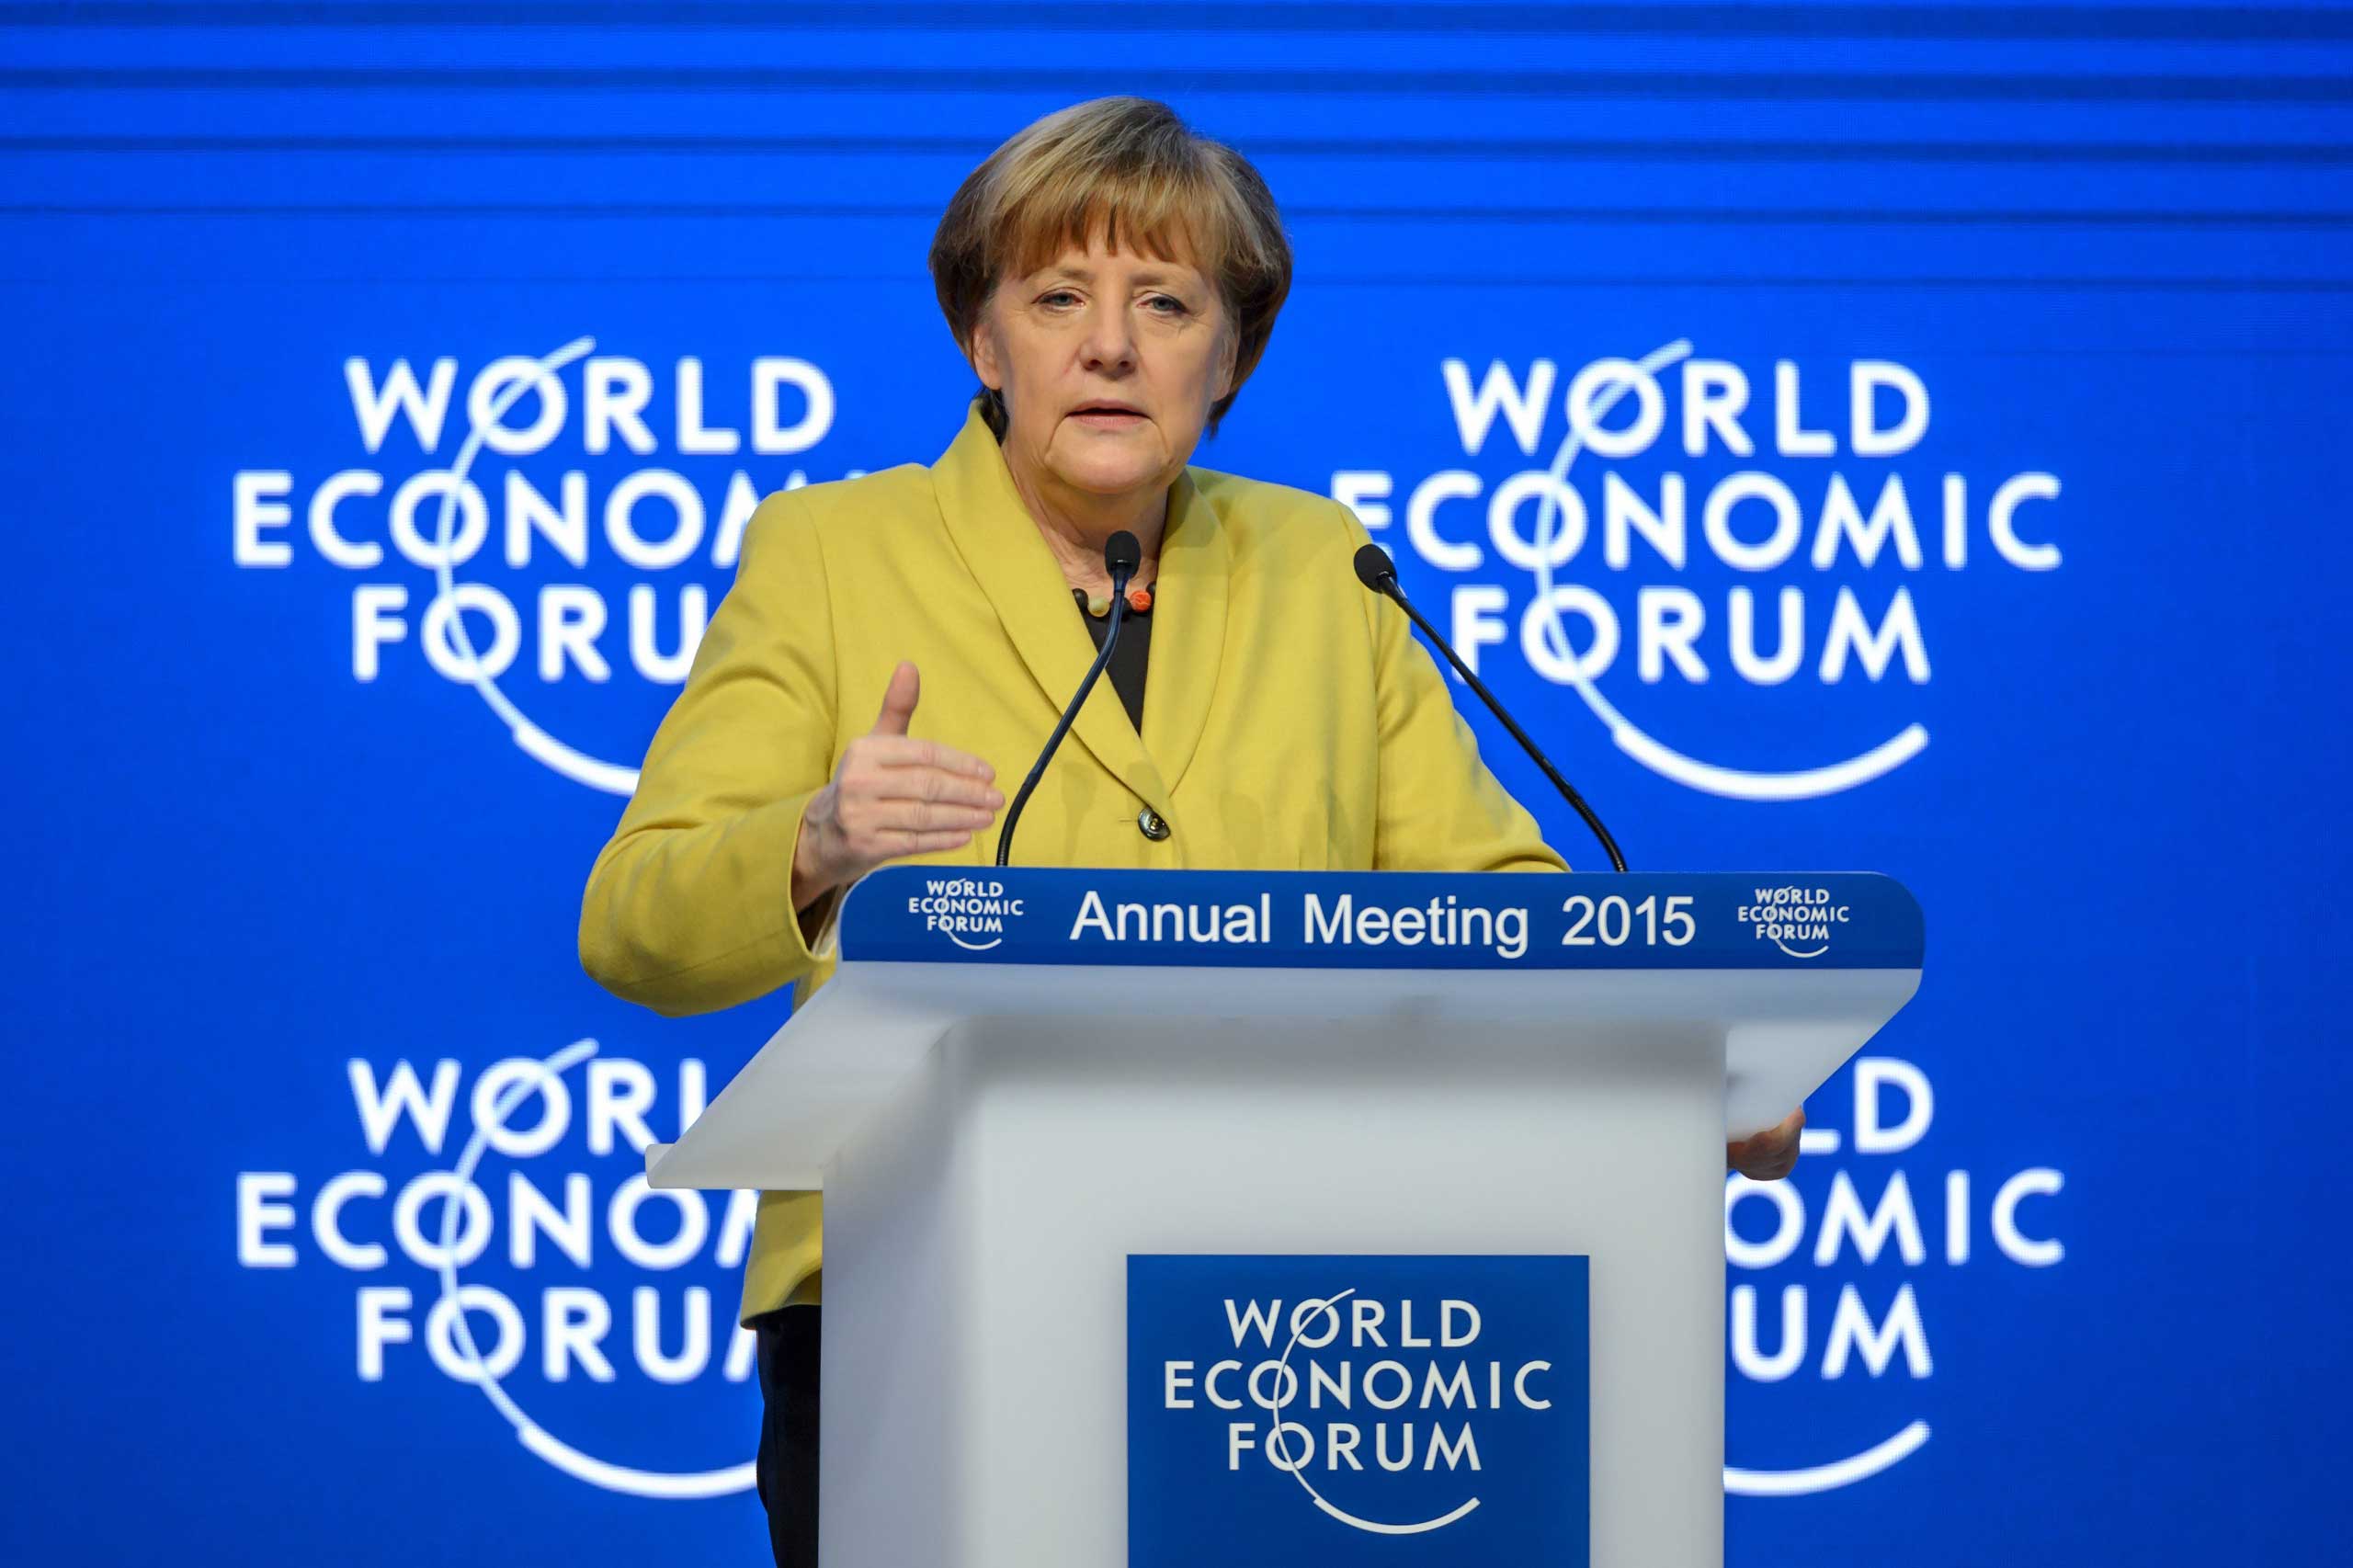 German Chancellor Angela Merkel attends a session of the World Economic Forum (WEF) annual meeting on Jan. 22, 2015 in Davos. (Fabrice Cofrini—AFP/Getty Images)